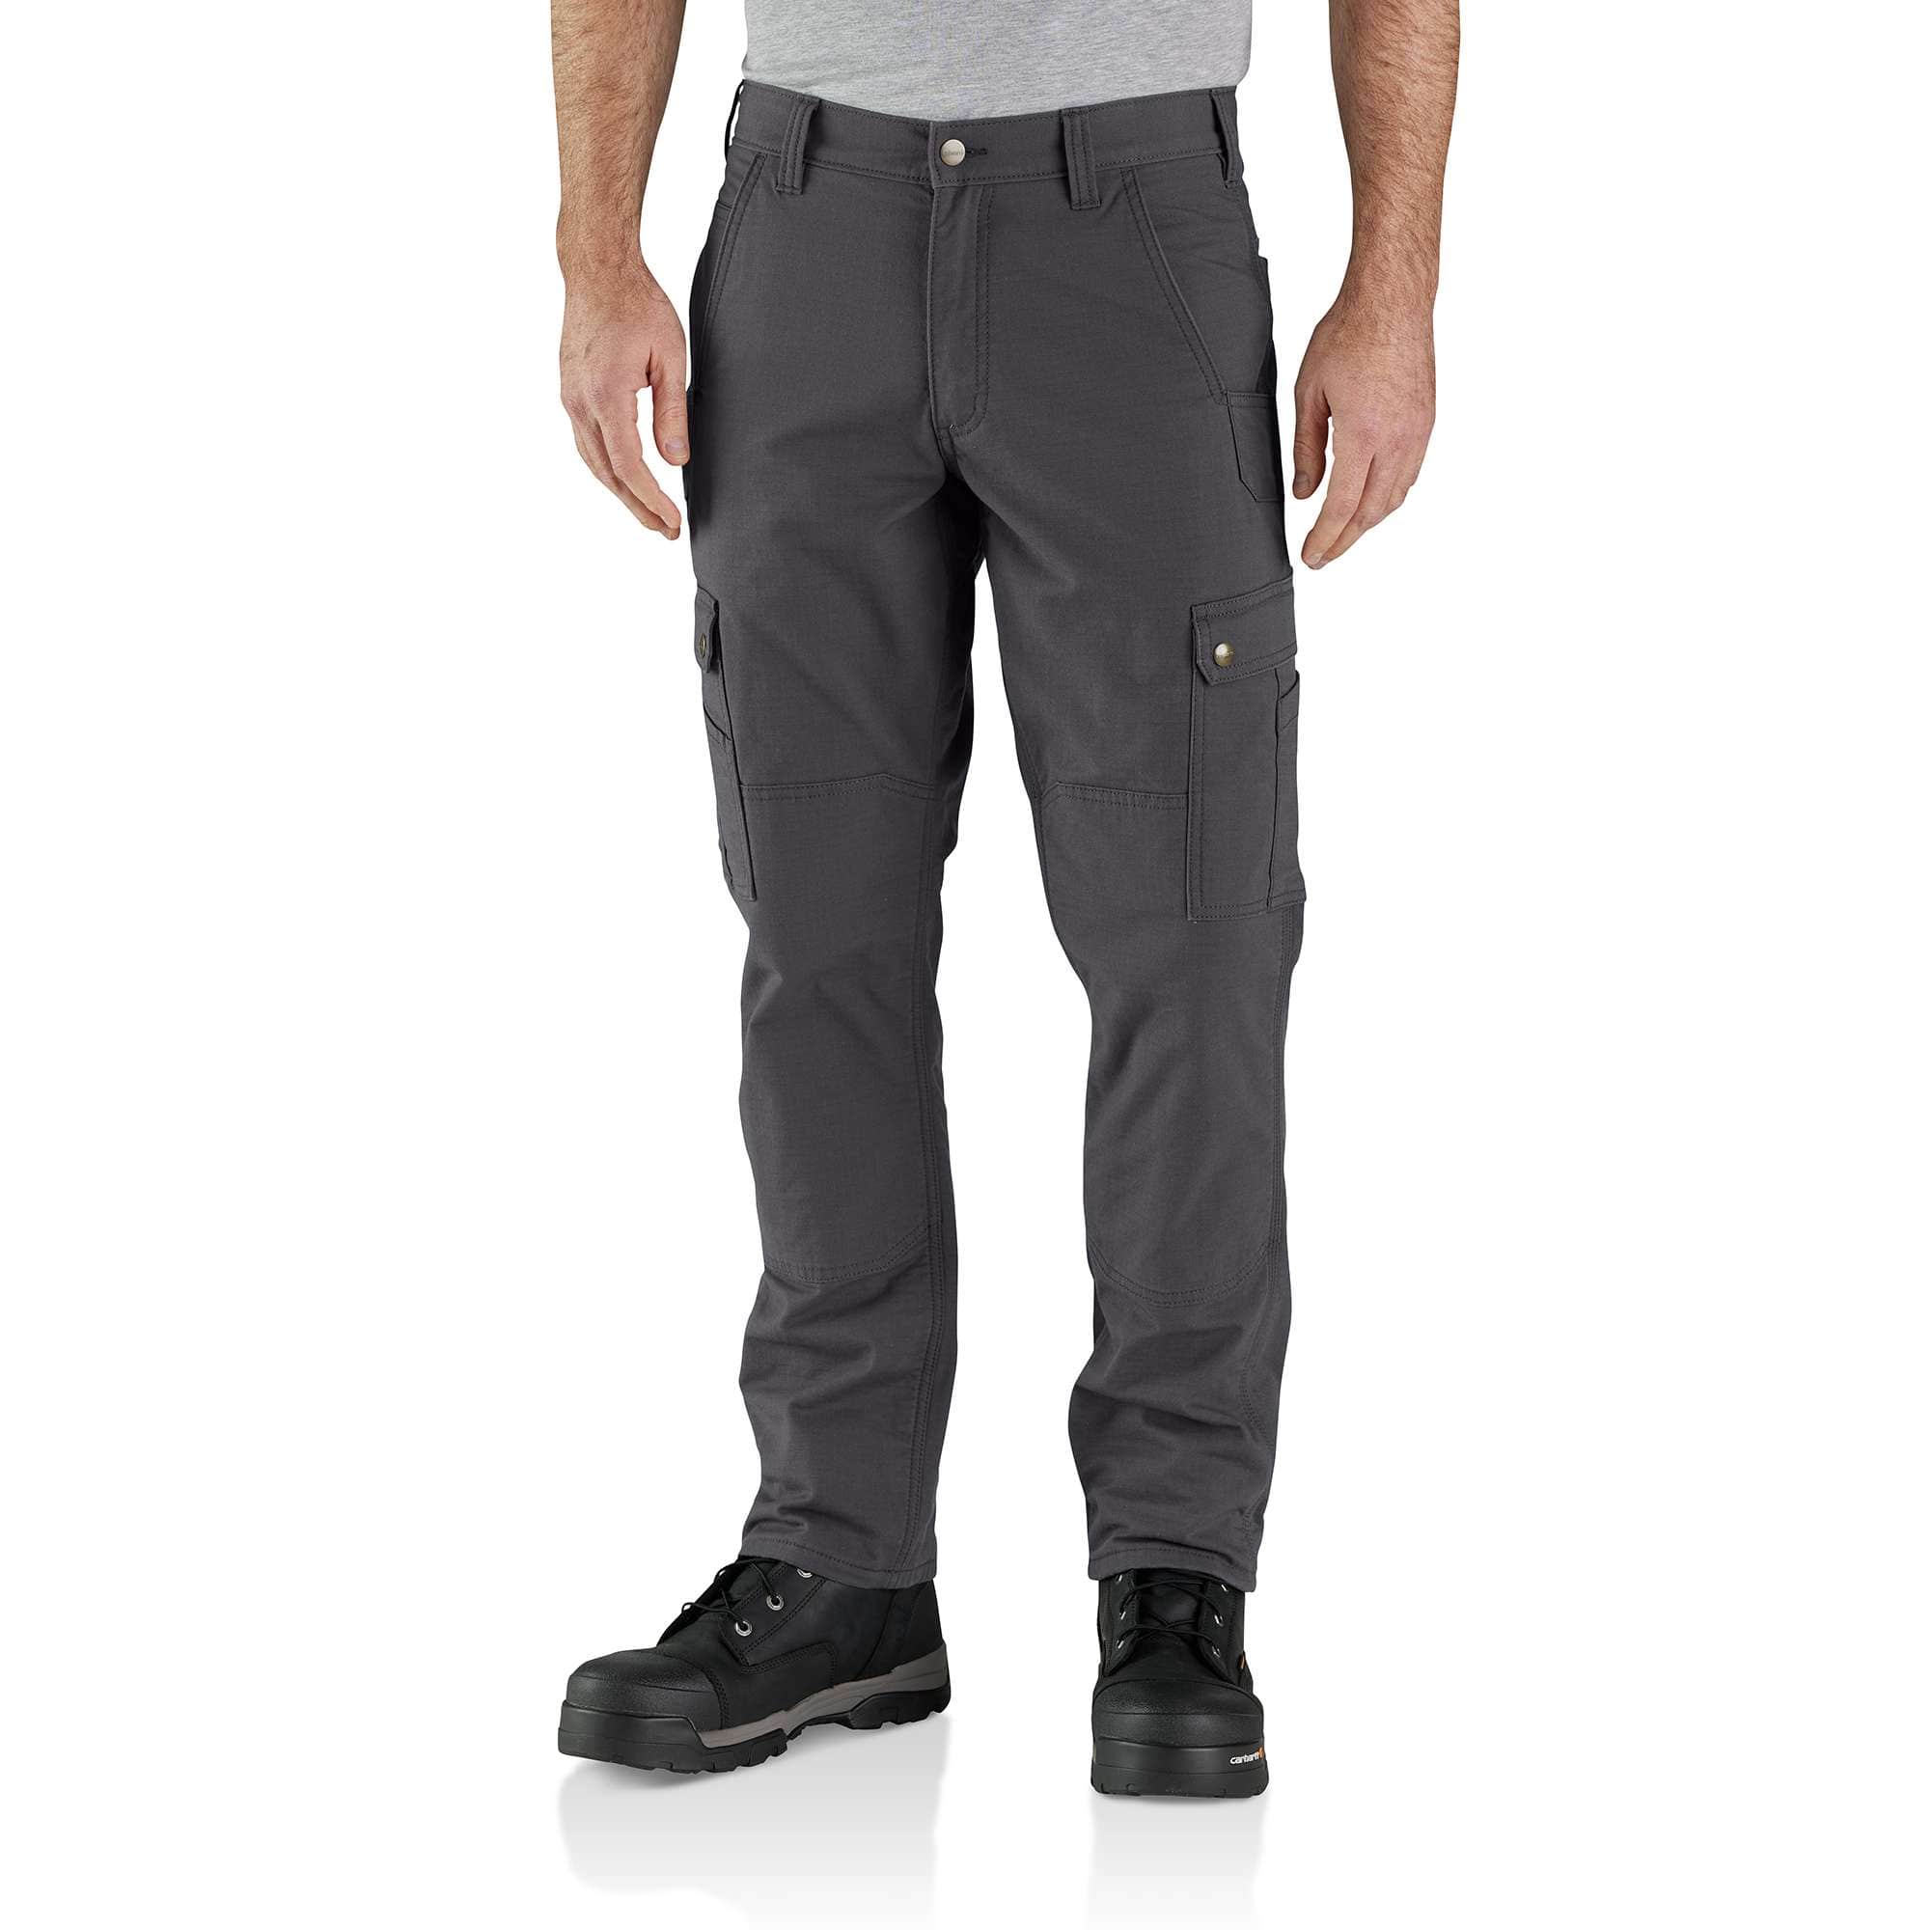 Buy Polar Fleece Lined Carpenter Pant Men's Jeans & Pants from Buyers  Picks. Find Buyers Picks fashion & more at